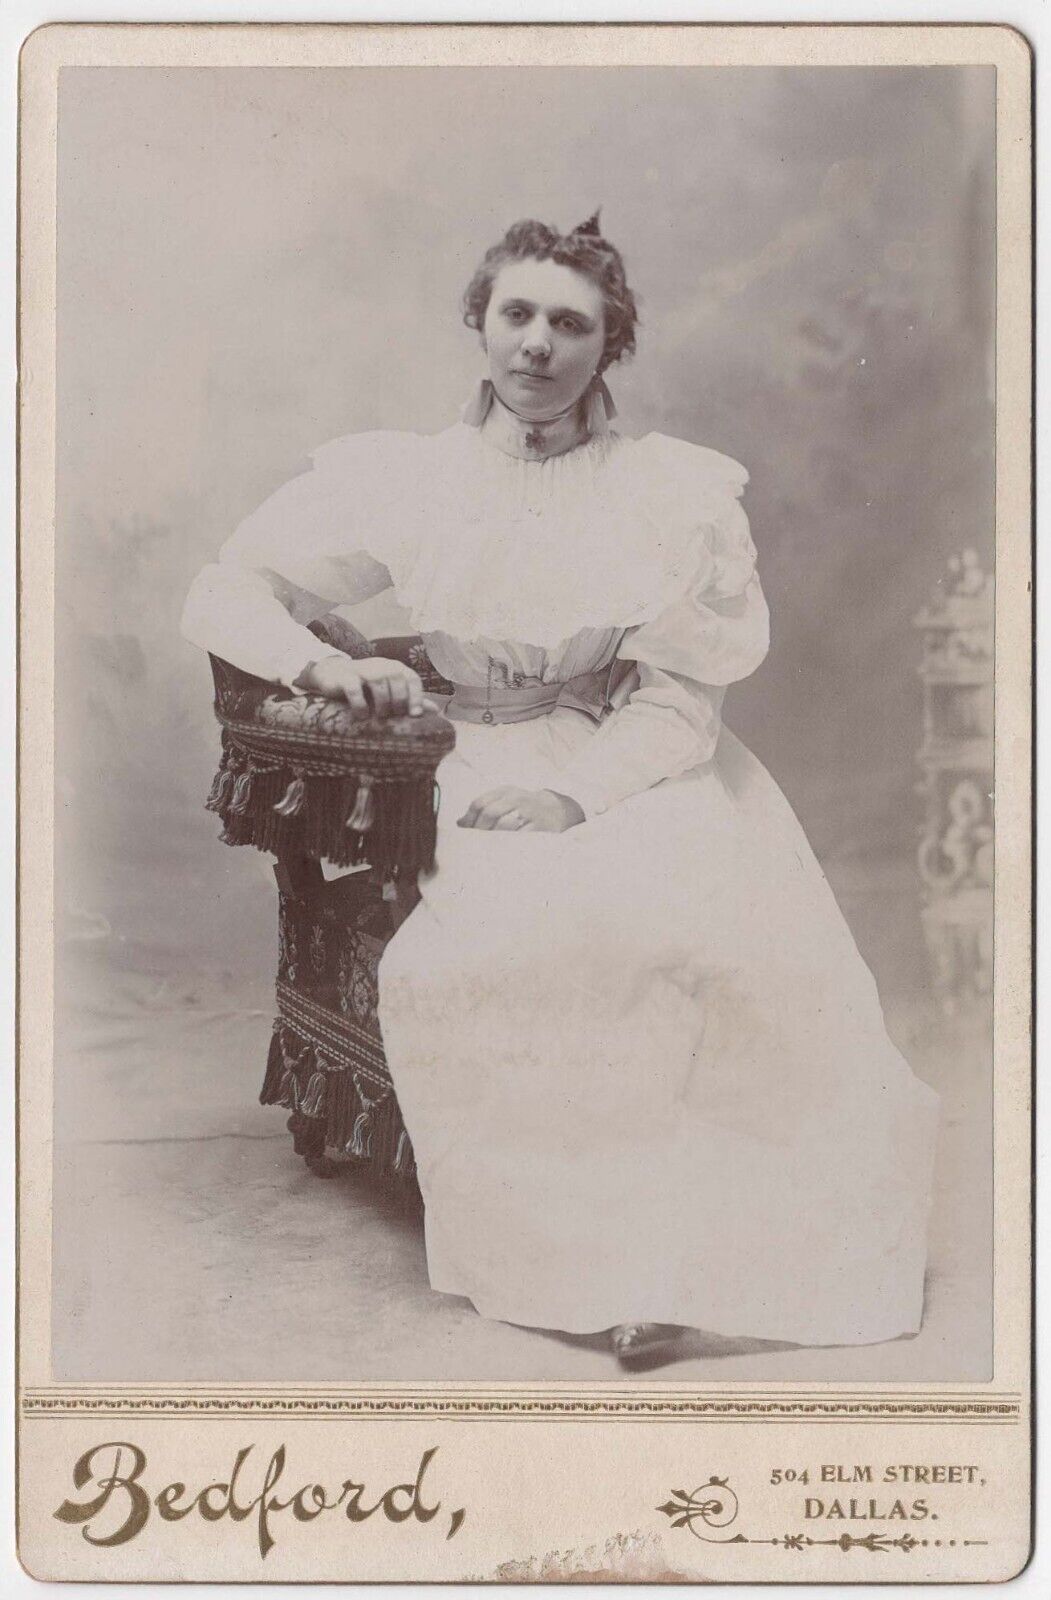 CIRCA 1890s CABINET CARD BEDFORD GORGEOUS YOUNG LADY IN WHITE DRESS DALLAS TEXAS